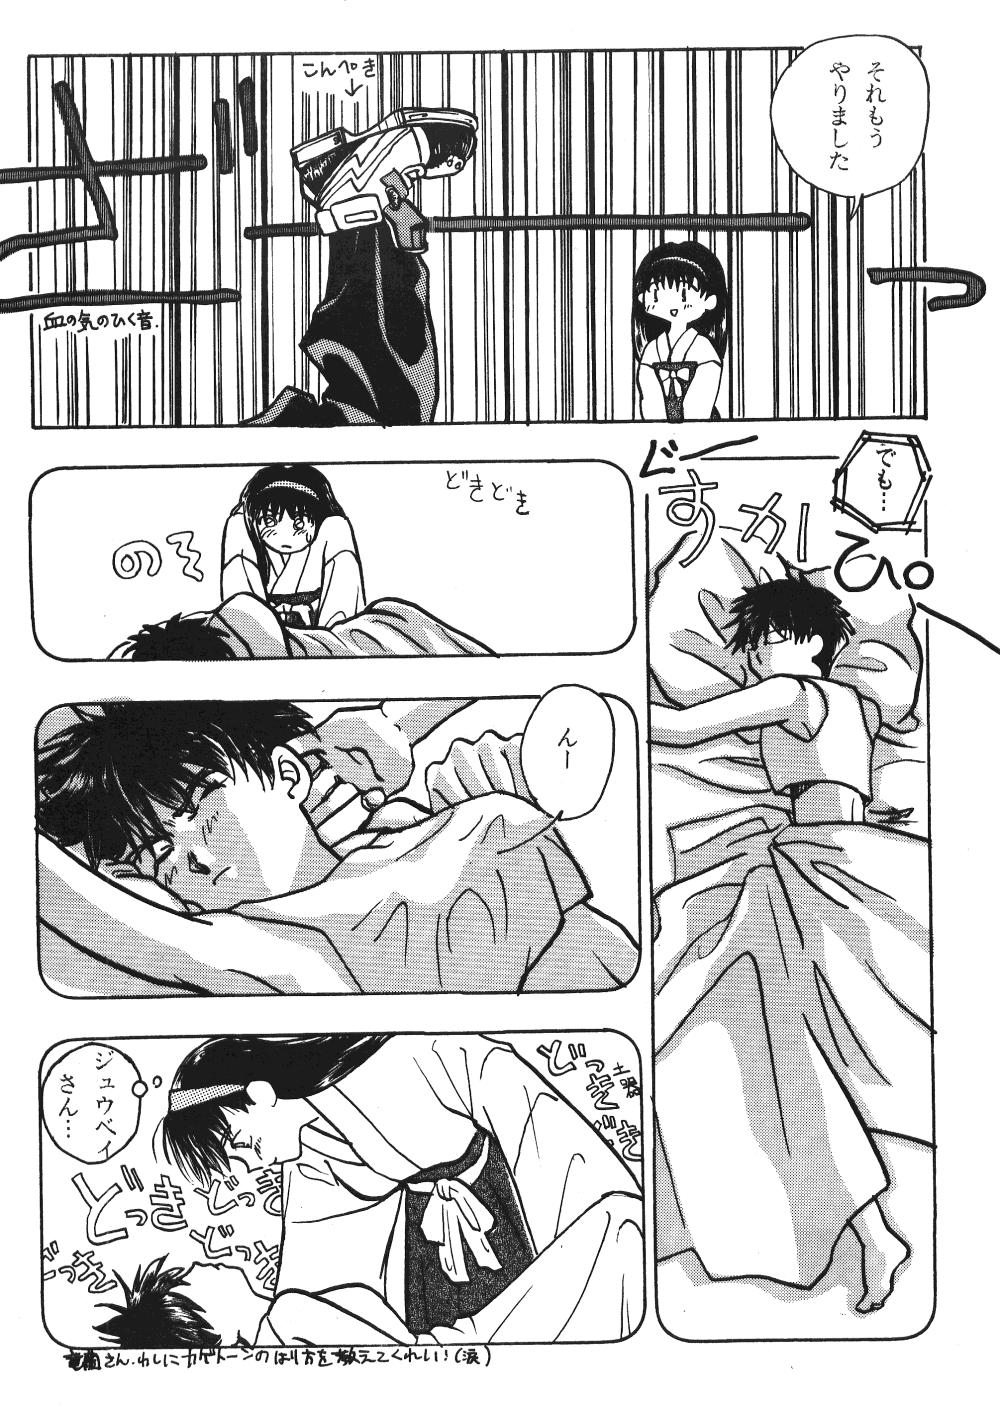 Curvy Seinen Sunday - Street fighter Ranma 12 Ghost sweeper mikami Tranny Sex - Page 11